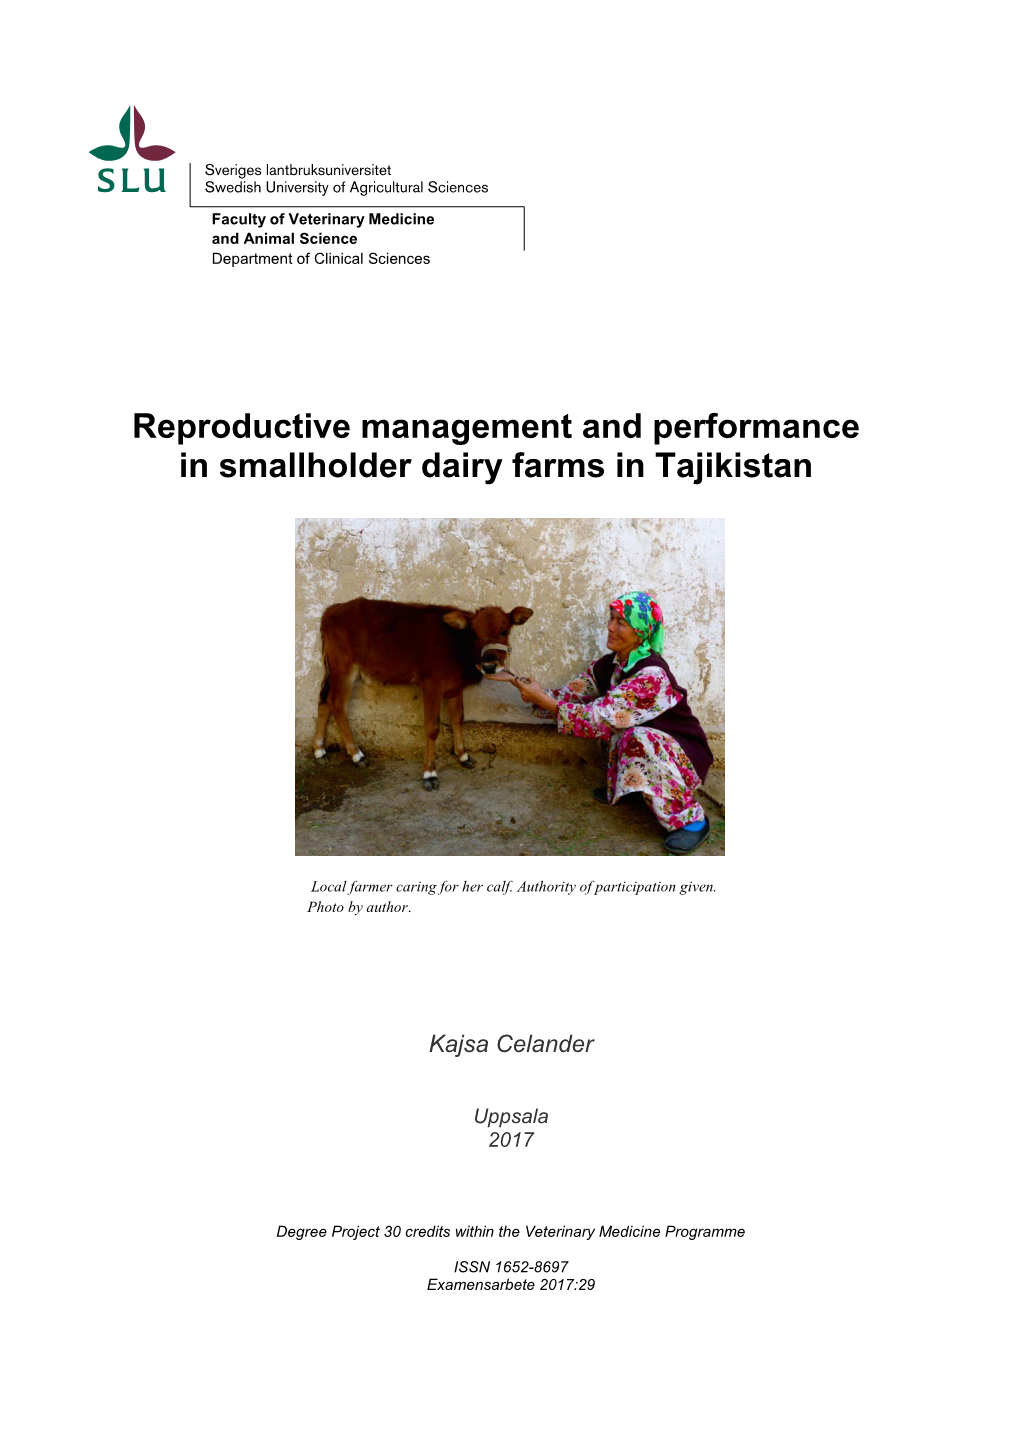 Reproductive Management and Performance in Smallholder Dairy Farms in Tajikistan